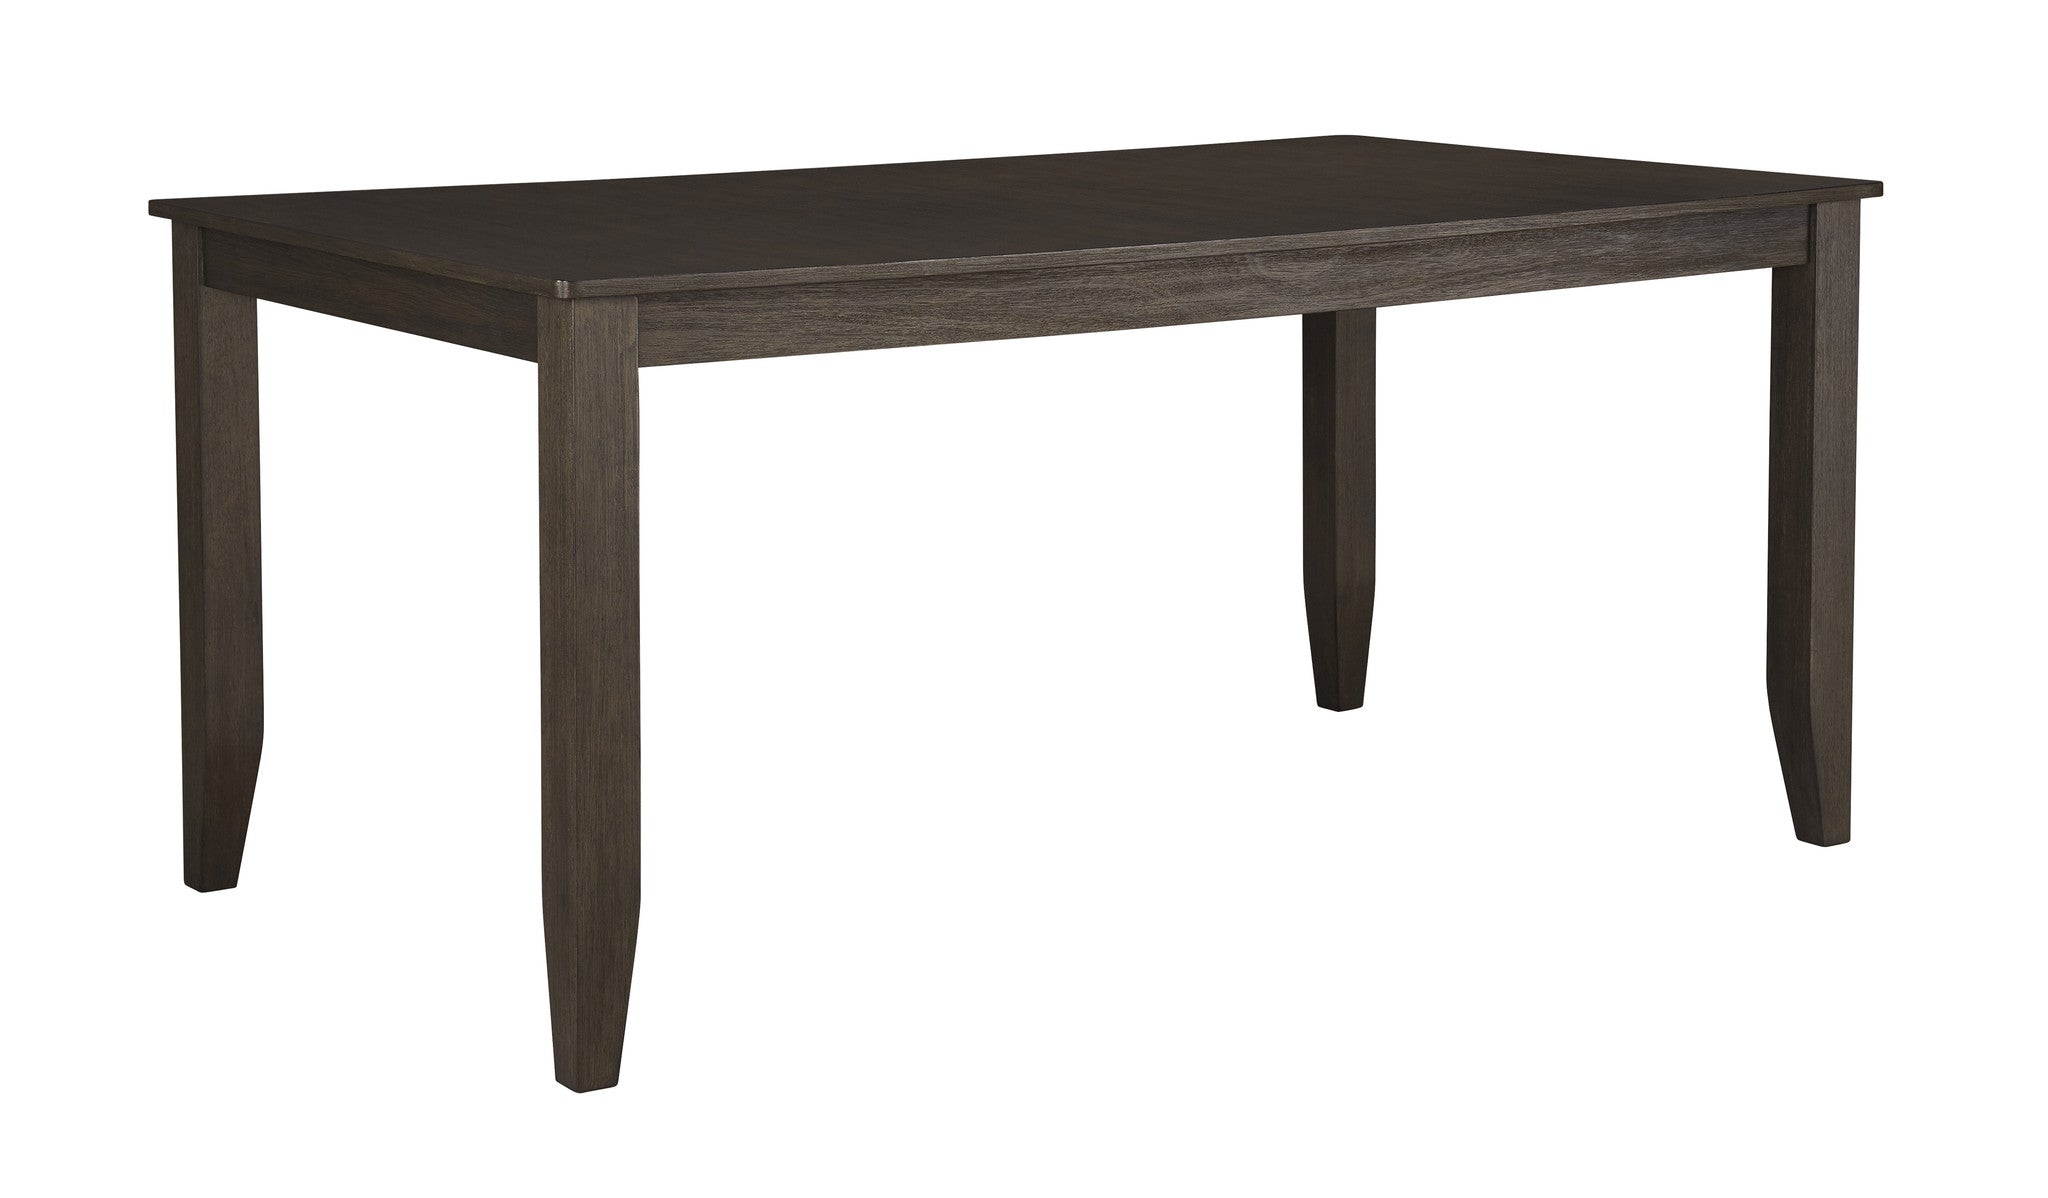 Dresbar Counter Height Dining Room Table